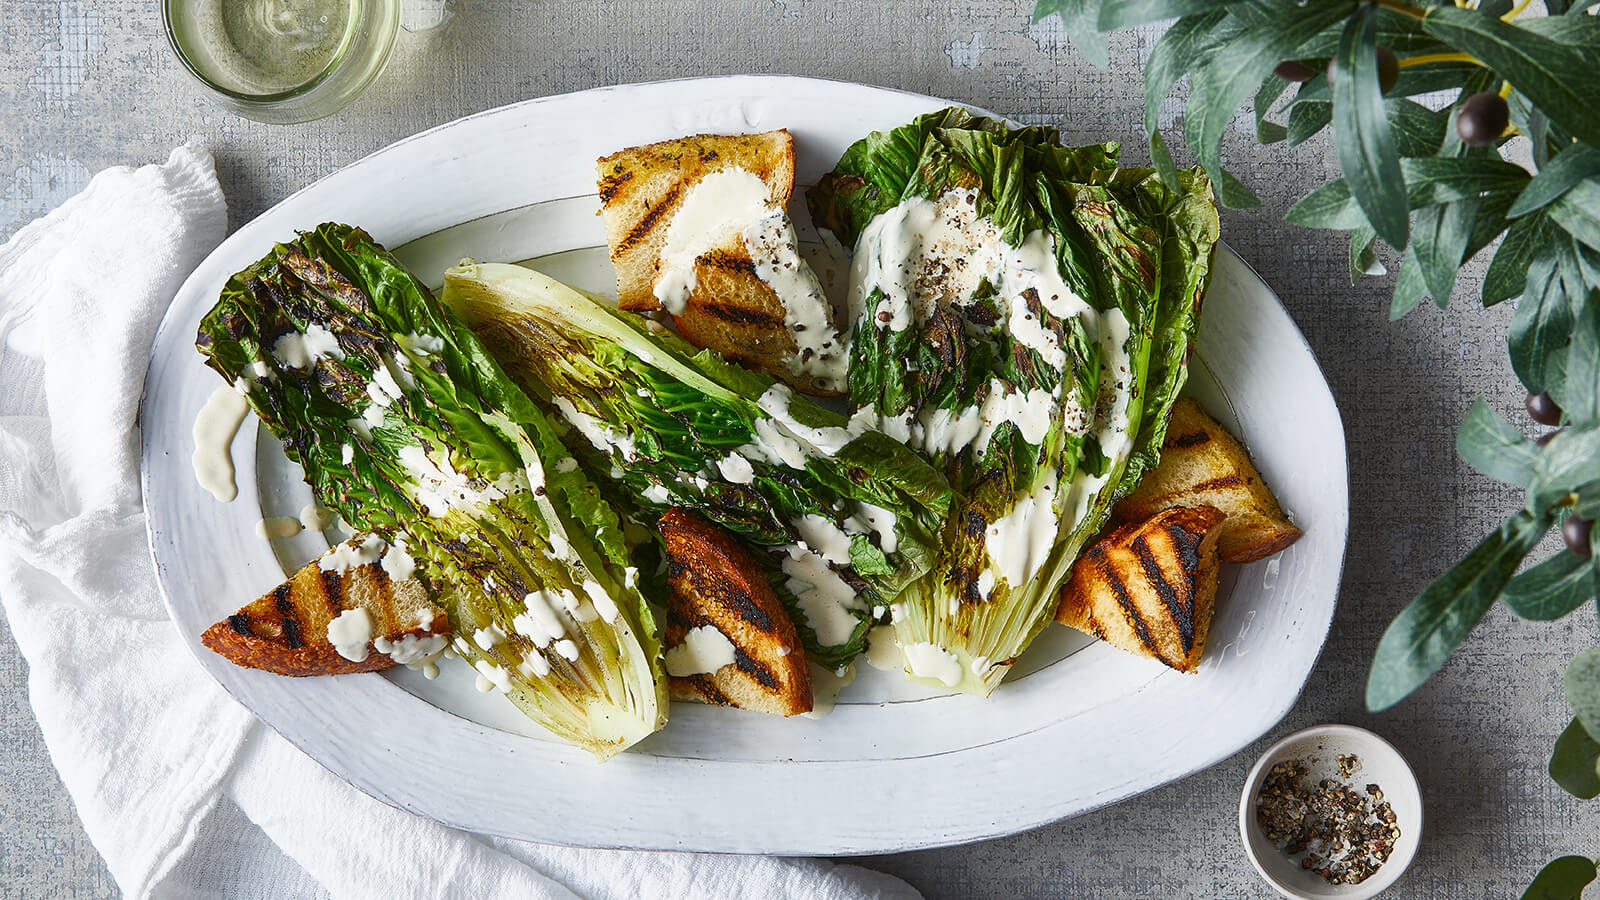 Grilled Romaine Salad with Garlic Croutons